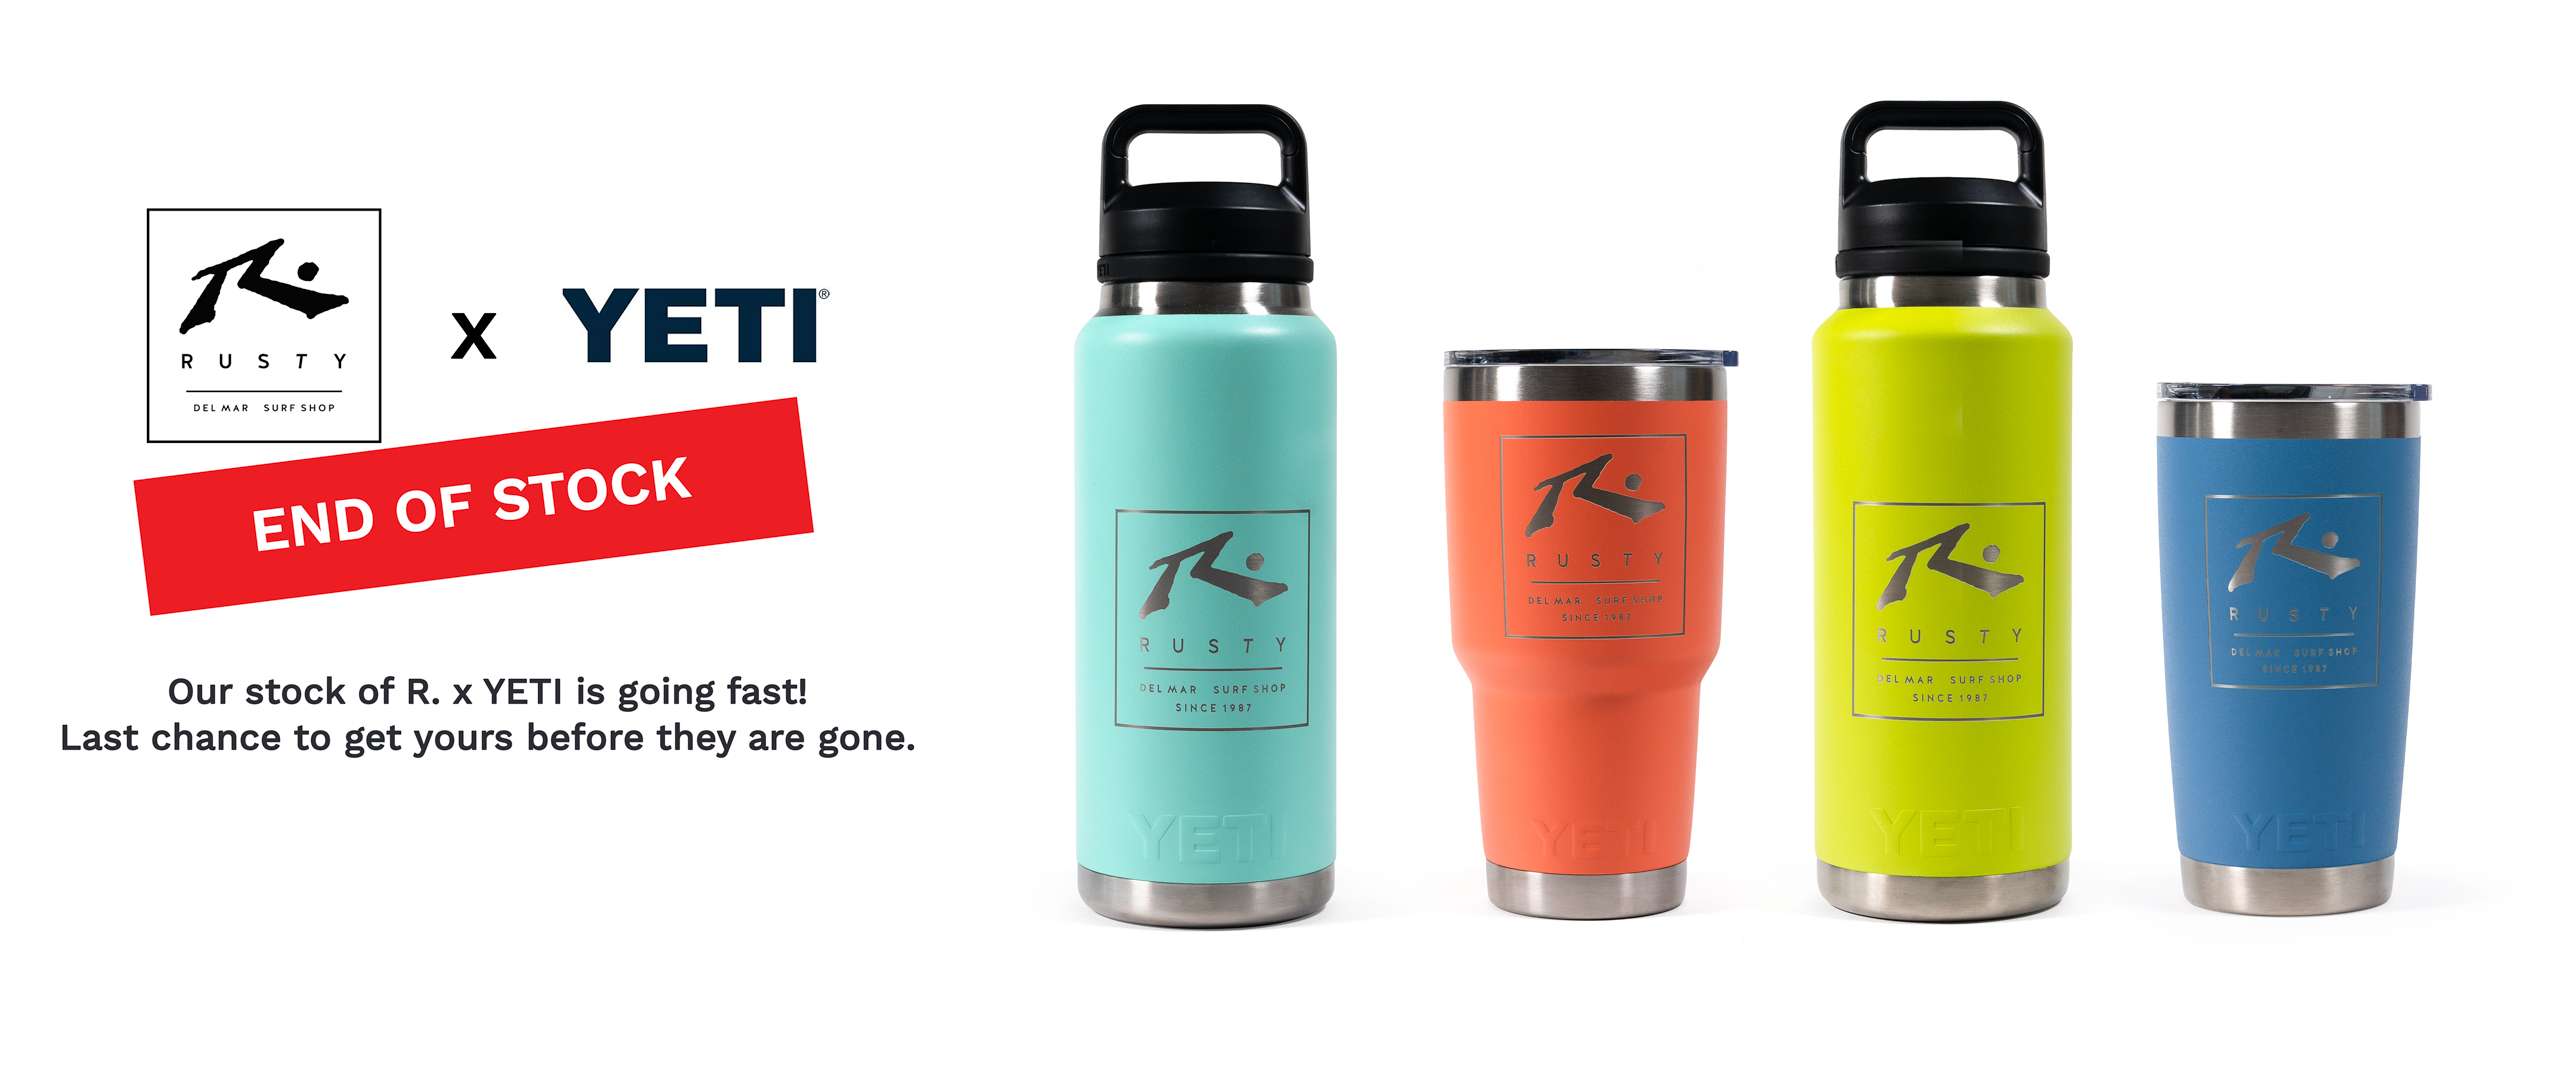 Yeti Coolers and Drinkware